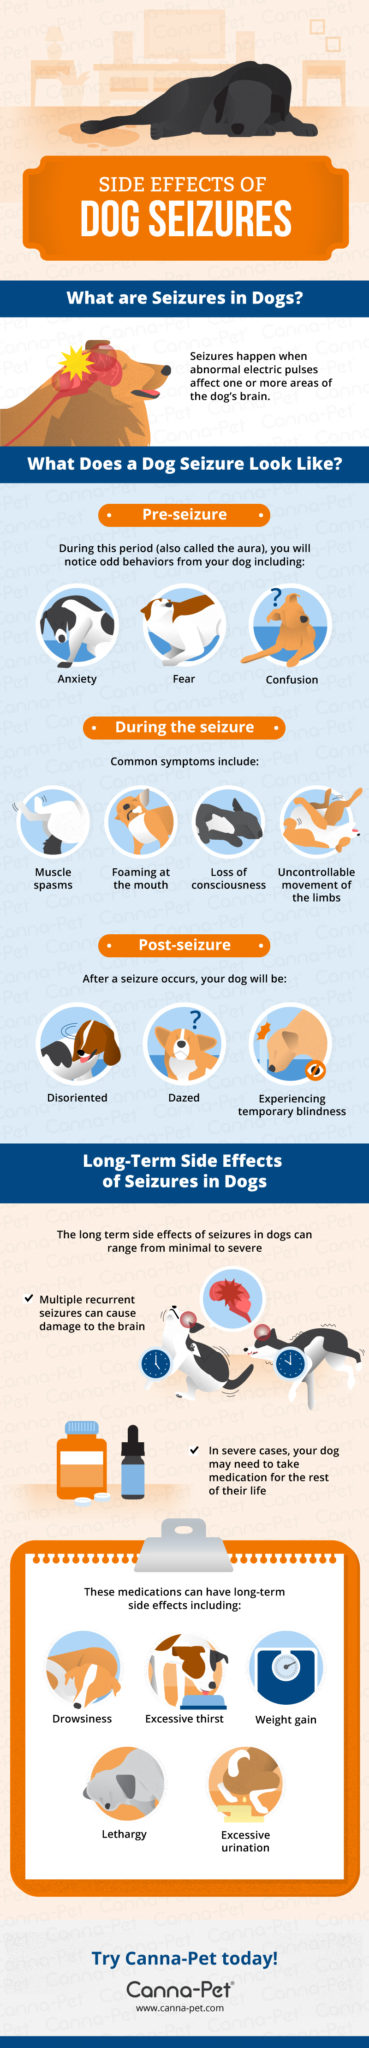 Side Effects of Dog Seizures Infographic